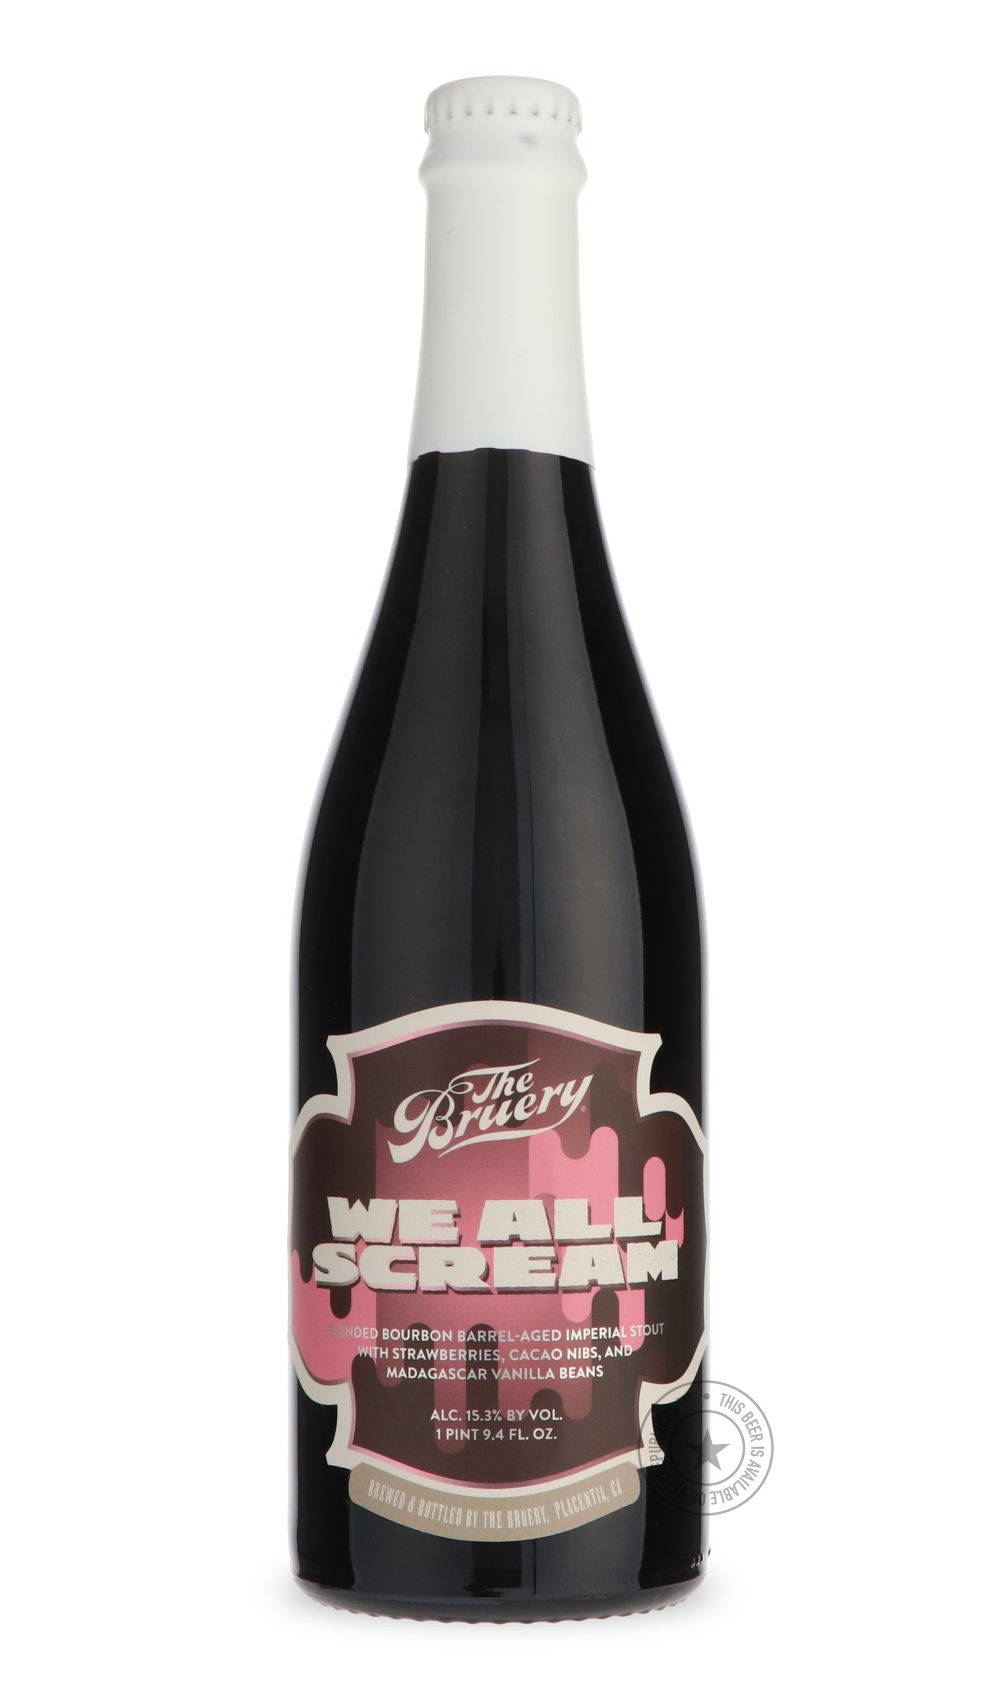 -The Bruery- We All Scream-Stout & Porter- Only @ Beer Republic - The best online beer store for American & Canadian craft beer - Buy beer online from the USA and Canada - Bier online kopen - Amerikaans bier kopen - Craft beer store - Craft beer kopen - Amerikanisch bier kaufen - Bier online kaufen - Acheter biere online - IPA - Stout - Porter - New England IPA - Hazy IPA - Imperial Stout - Barrel Aged - Barrel Aged Imperial Stout - Brown - Dark beer - Blond - Blonde - Pilsner - Lager - Wheat - Weizen - Amb